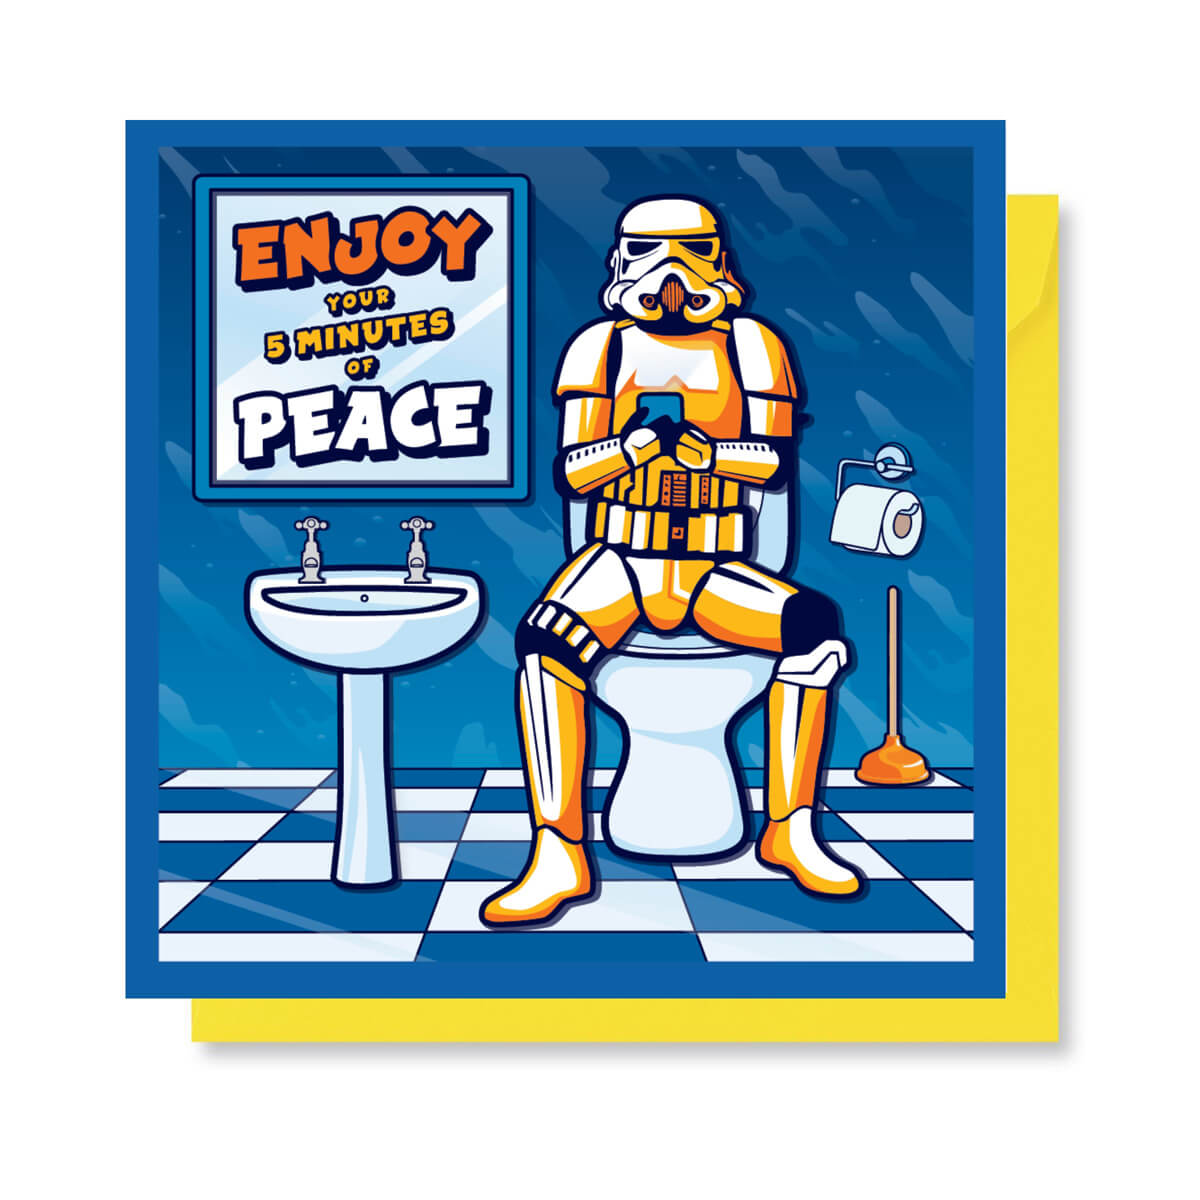 Original Stormtrooper Greeting Card which shows a Stormtrooper sitting on the toilet with 'Enjoy Your 5 minutes of peace' written on the mirror - officially licensed and produced by Cardology